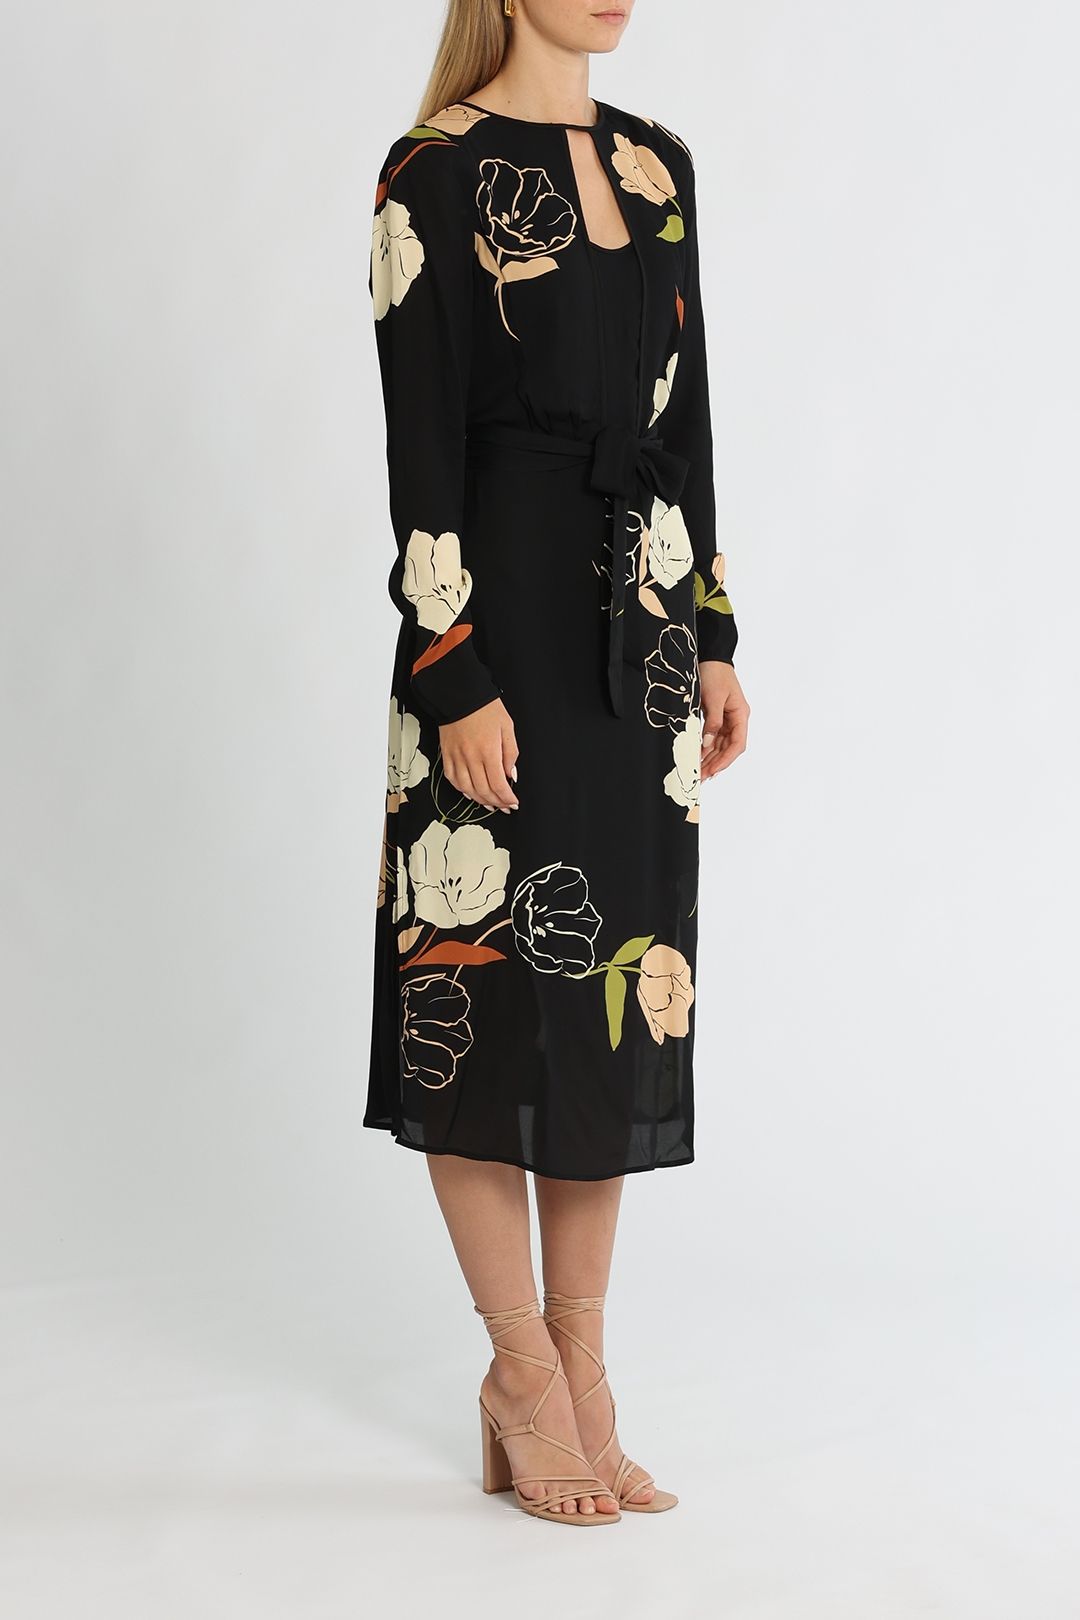 Reiss Arley Large Scale Floral Dress Midi